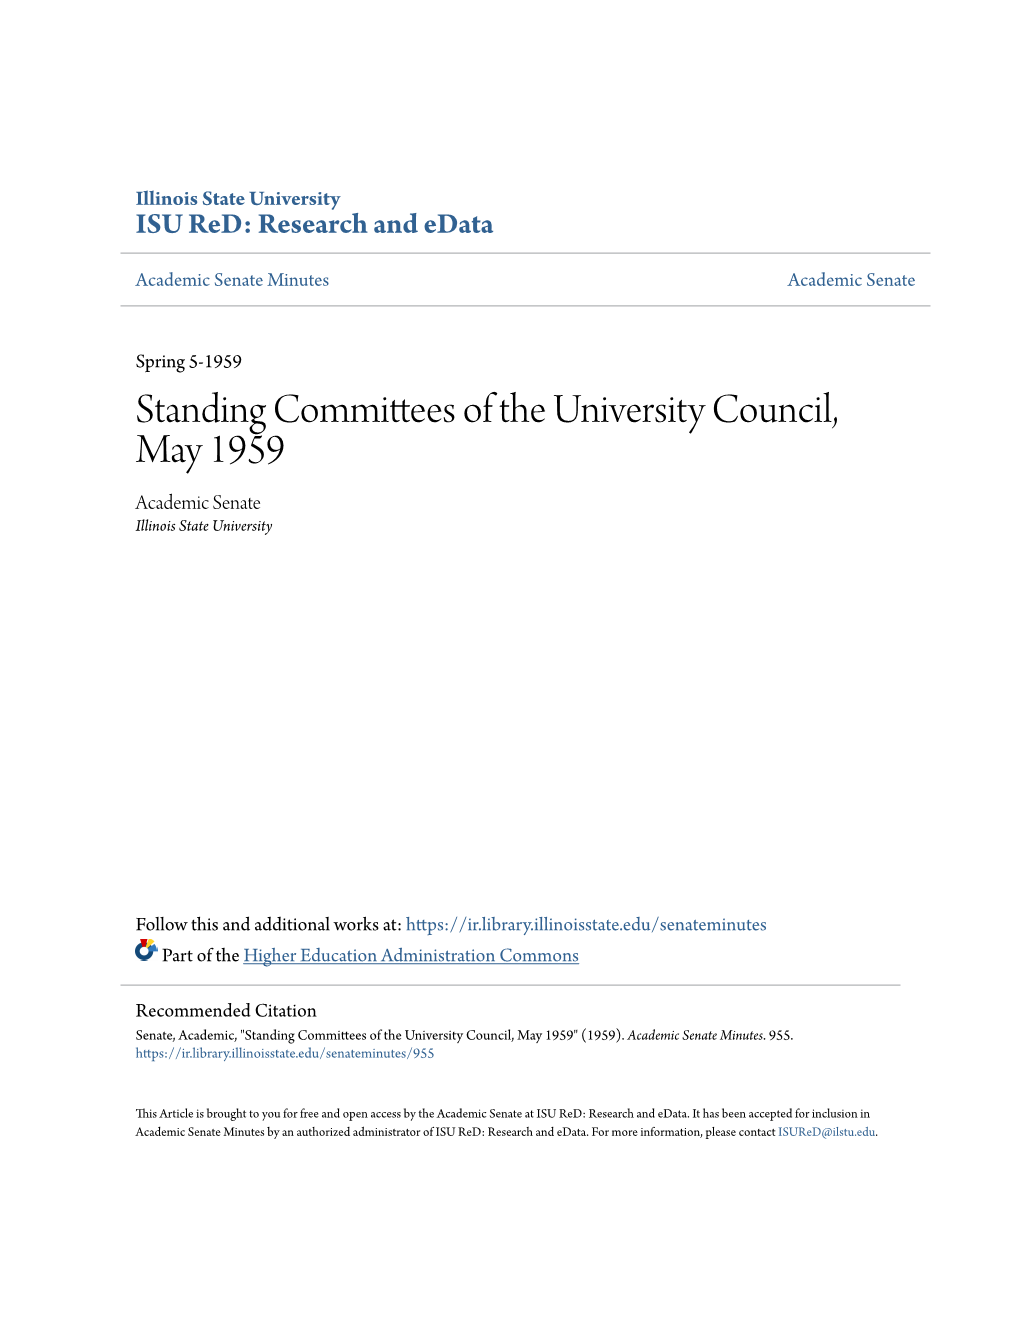 Standing Committees of the University Council, May 1959 Academic Senate Illinois State University